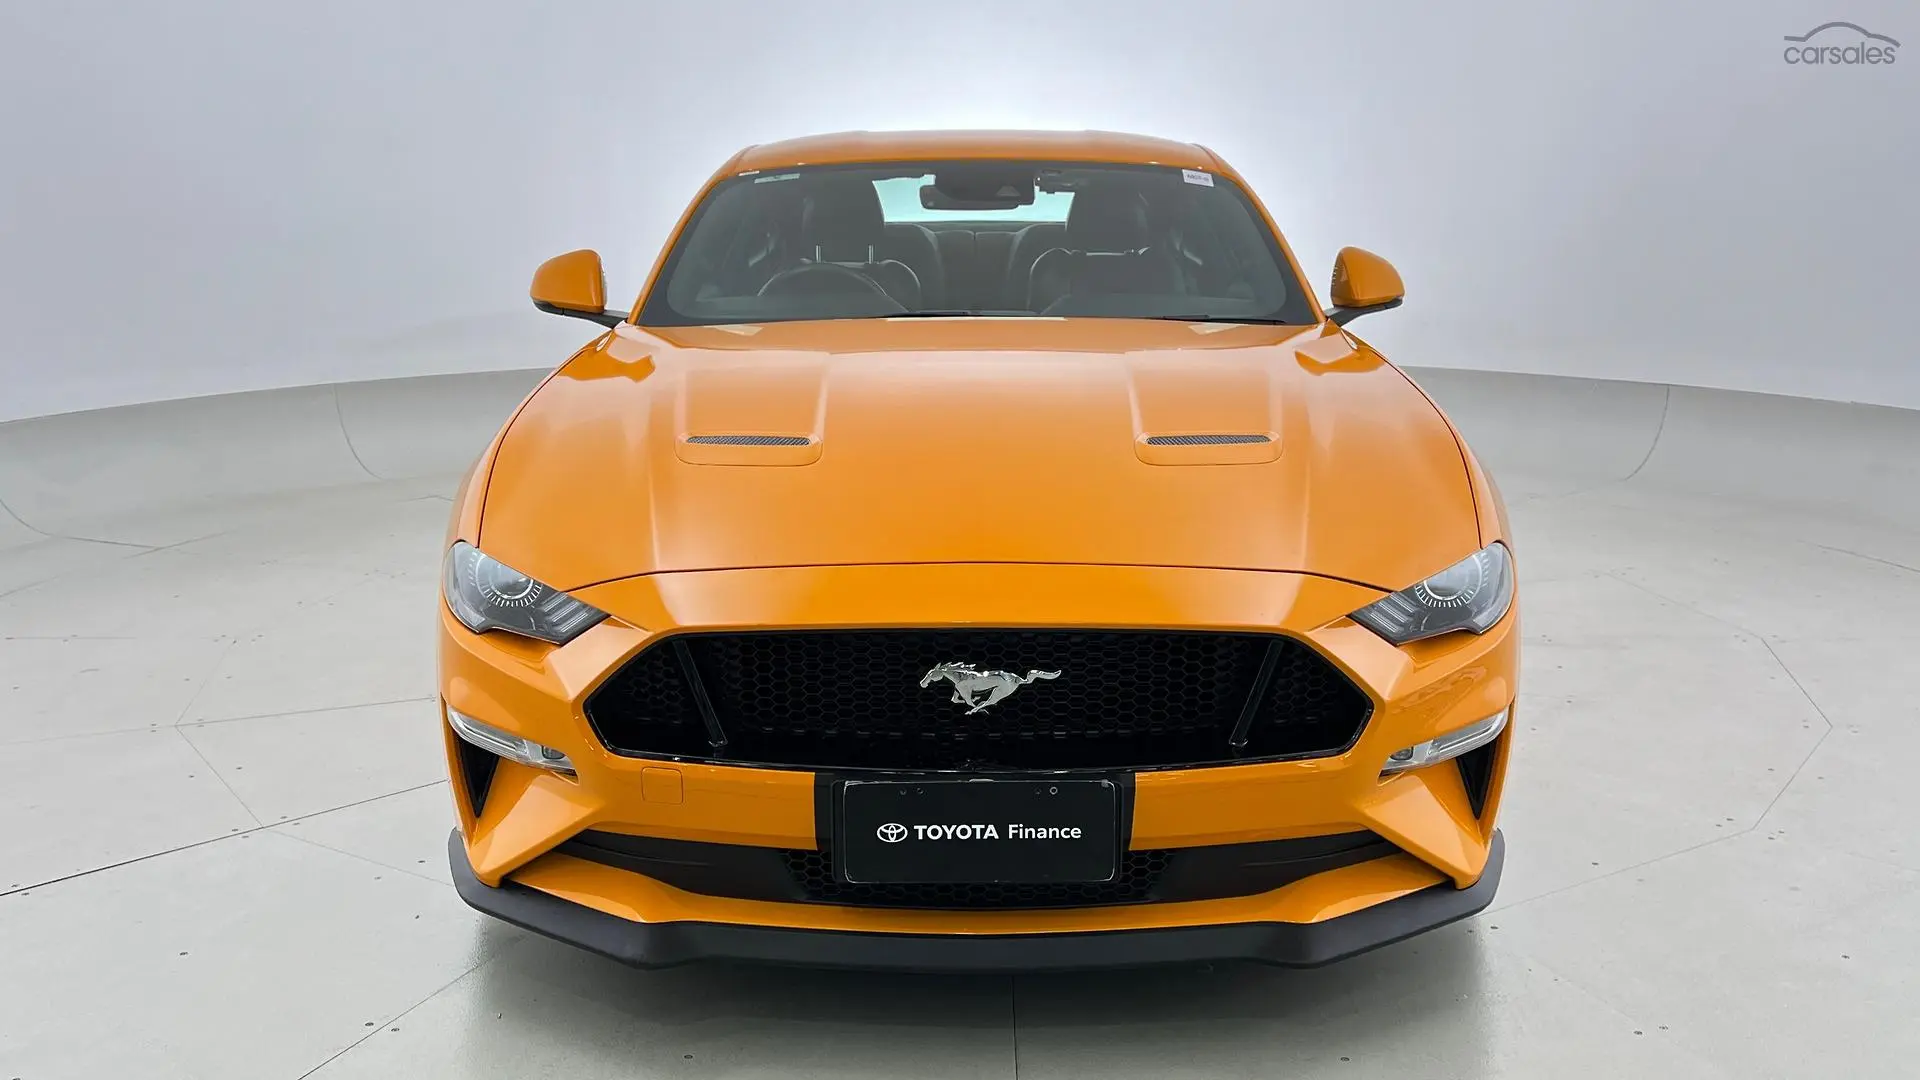 2019 Ford Mustang Image 9